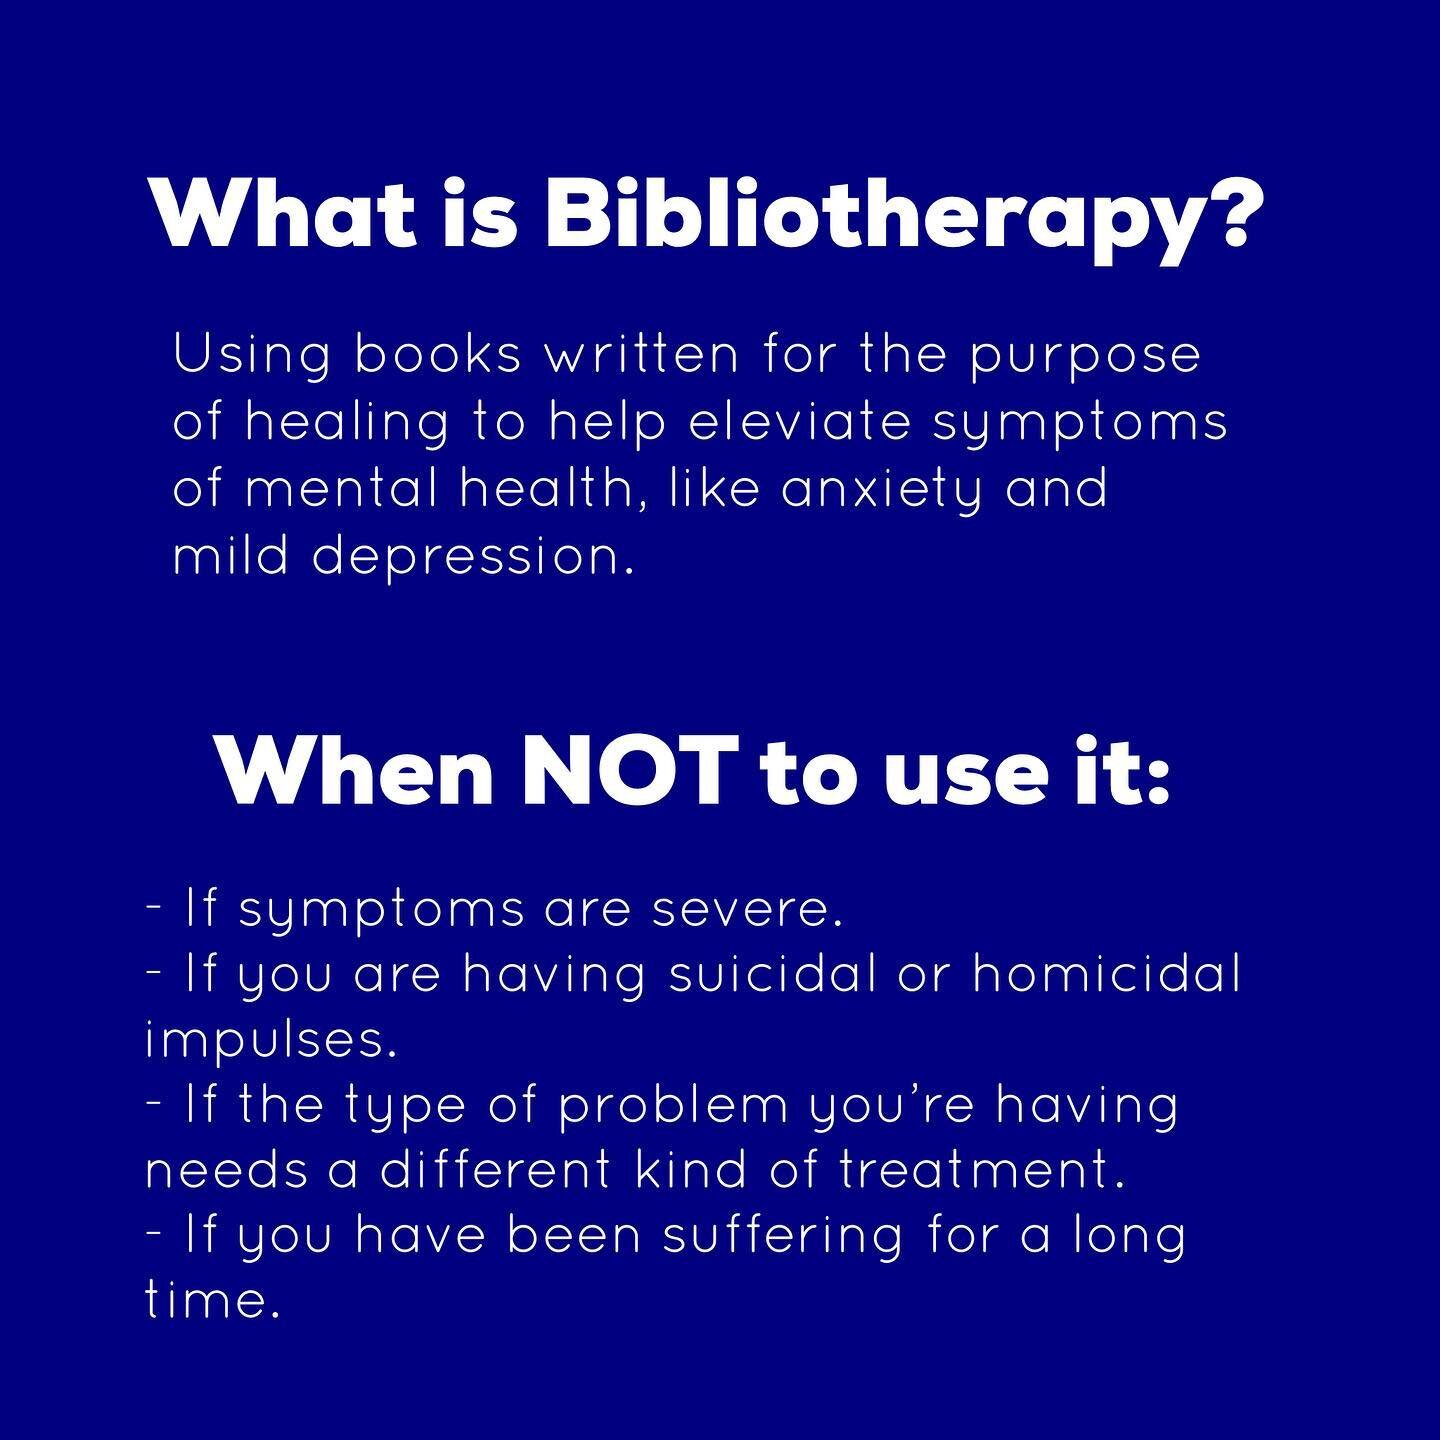 I love me some bibliotherapy! Here are some important things to consider before you jump onto the books are therapy bandwagon. 
1. If your symptoms are severe. 
2. If you are having suicidal or homicidal impulses.
3. If the type of problem you&rsquo;